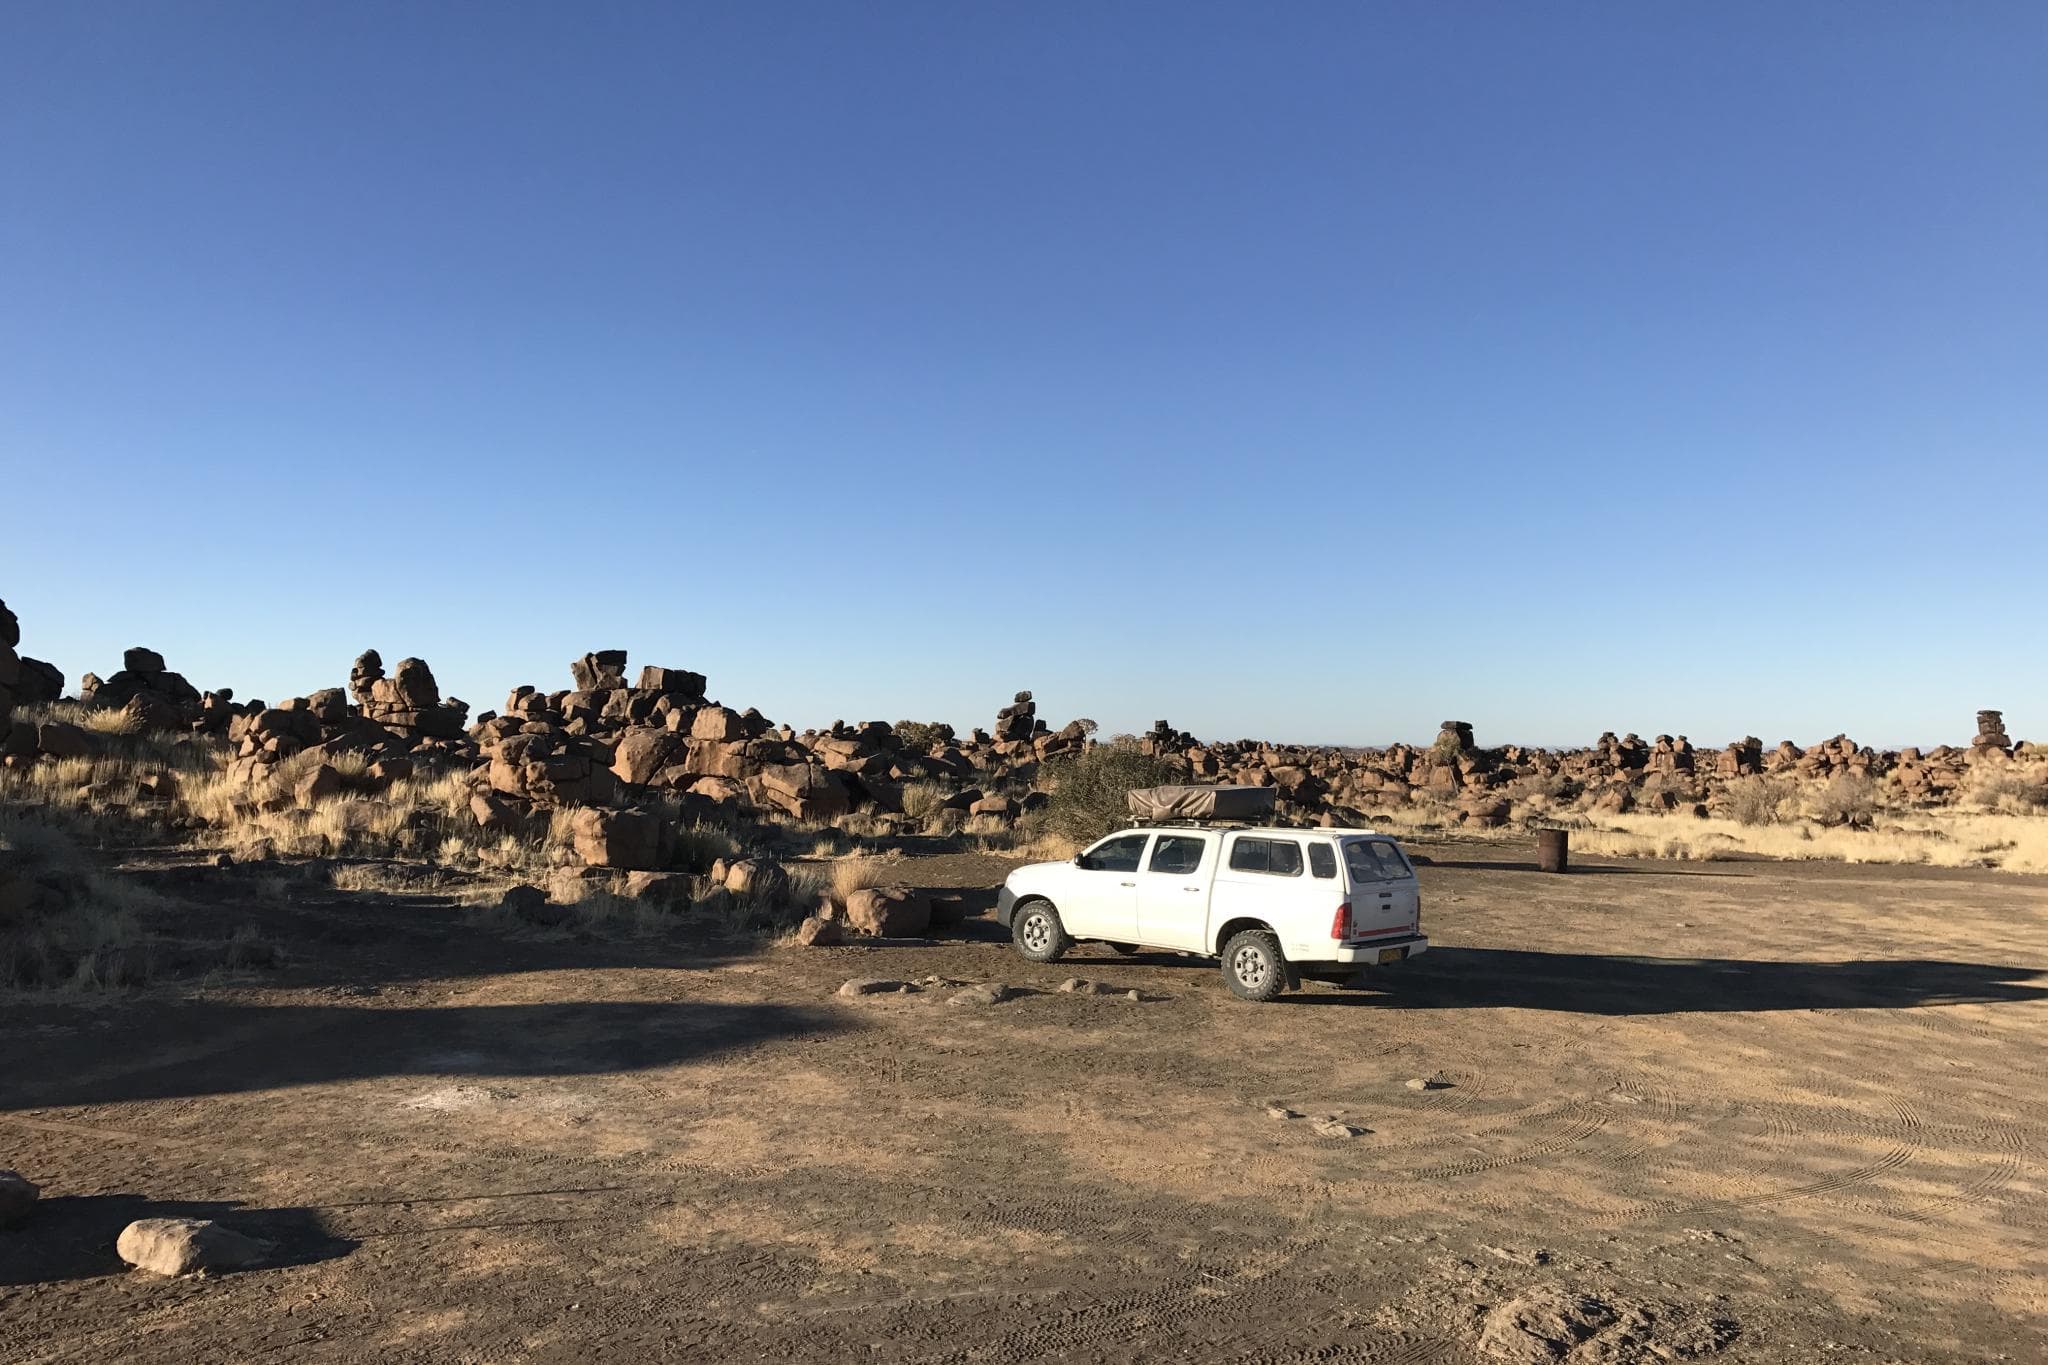 Gobabis, Quivertree forest y Giant's Playground